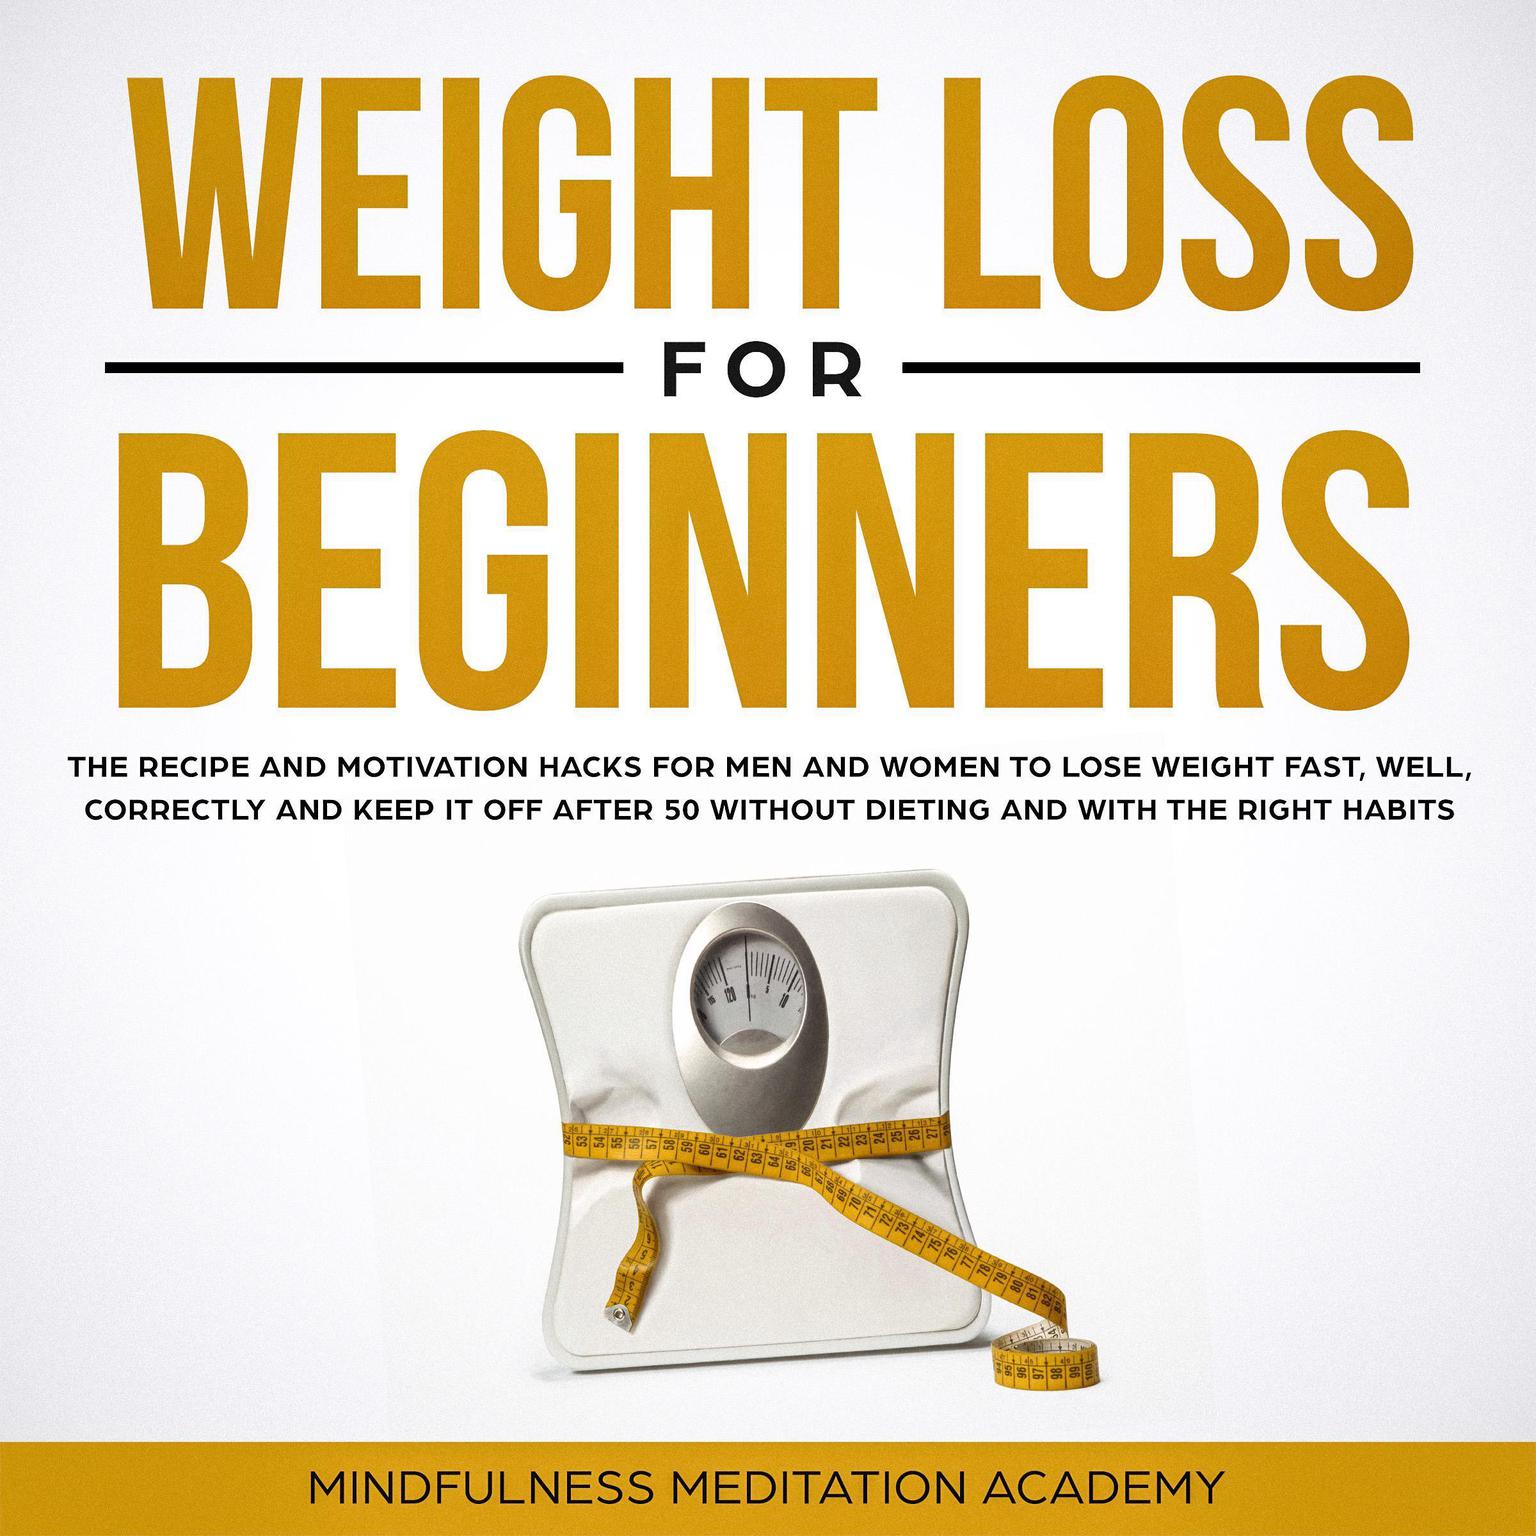 Weight Loss for Beginners (Abridged): The Recipe and Motivation Hacks for Men and Women to lose Weight Fast, Well, Correctly, and Keep It Off After Fifty without Dieting and with the Right Habits Audiobook, by Mindfulness Meditation Academy